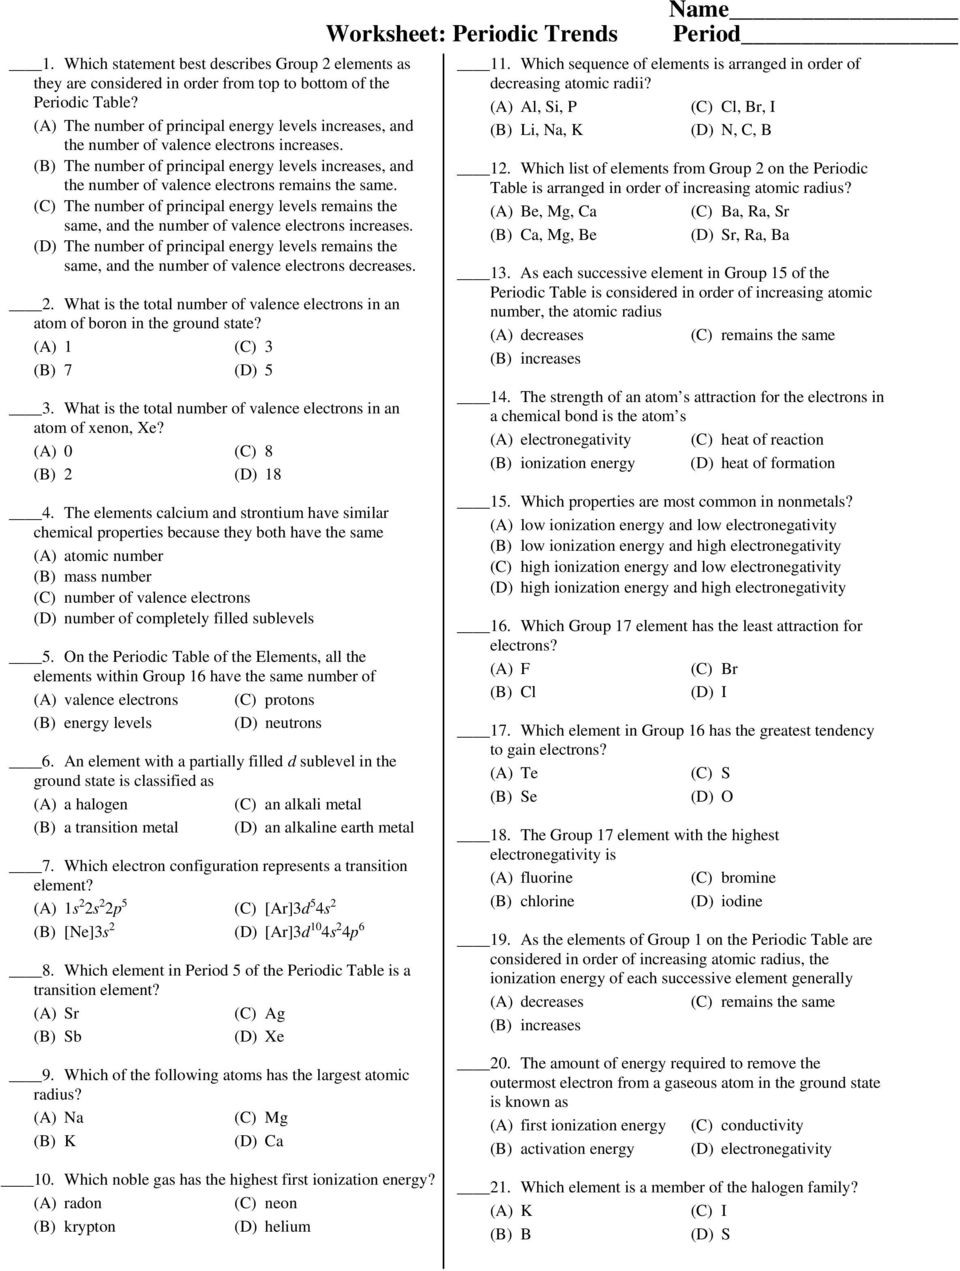 Periodic Trends Worksheet Answer Key Name Worksheet Periodic Trends 11 which Sequence Of